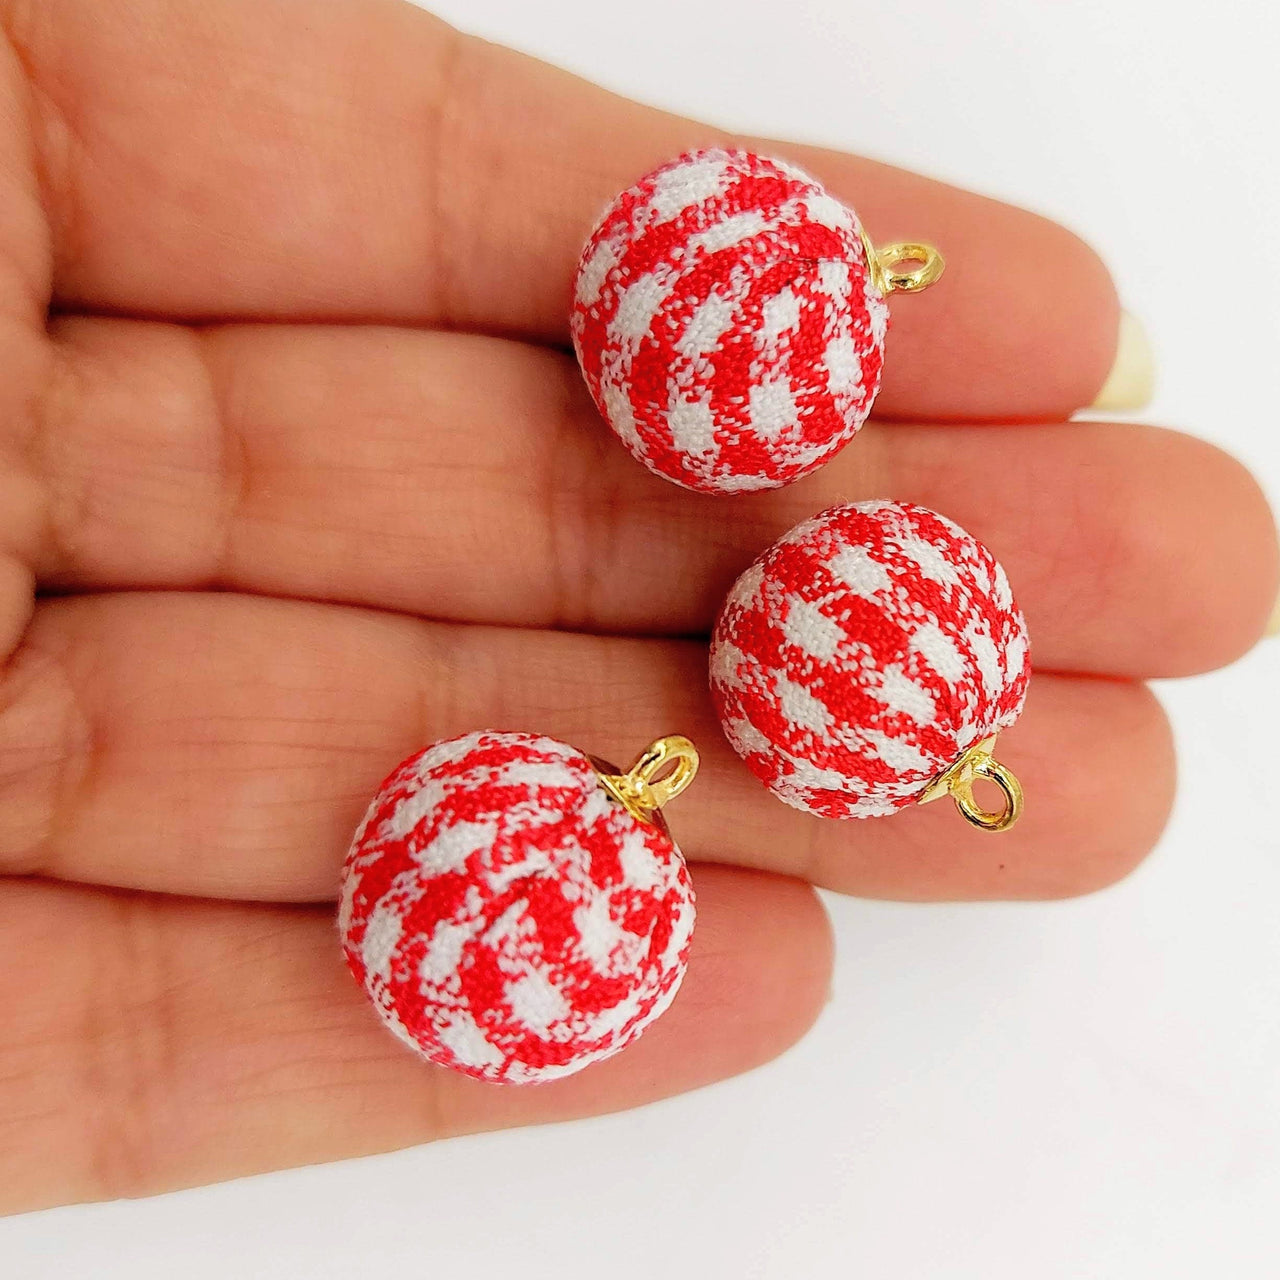 Red and White Checkered Cotton Small Fabric Balls Tassel, Button with Ring Cap, Decorative Tassels